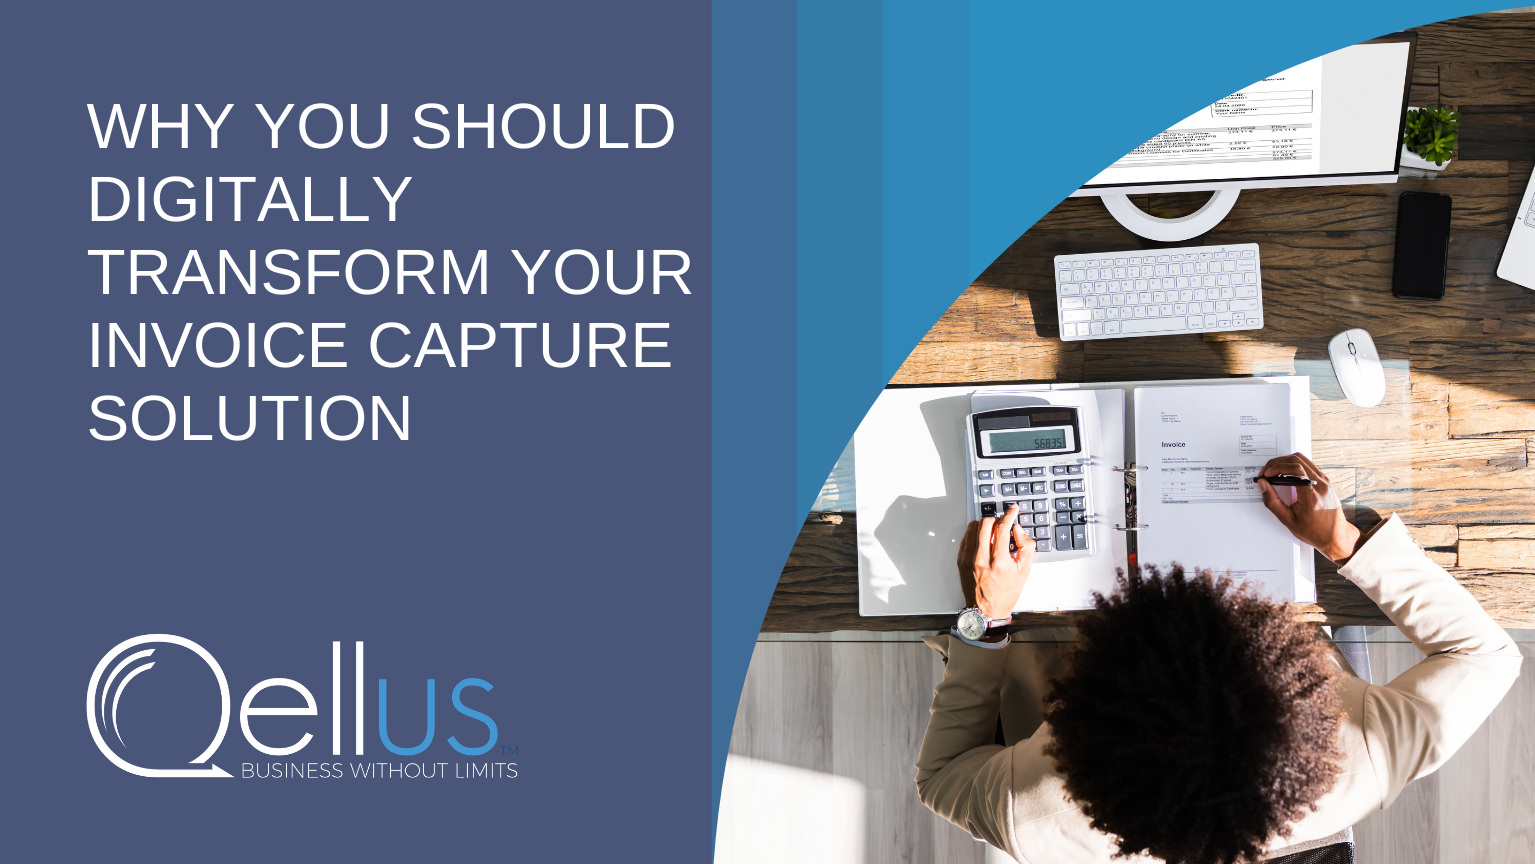 5 reasons to digitally transform your invoice capture solution